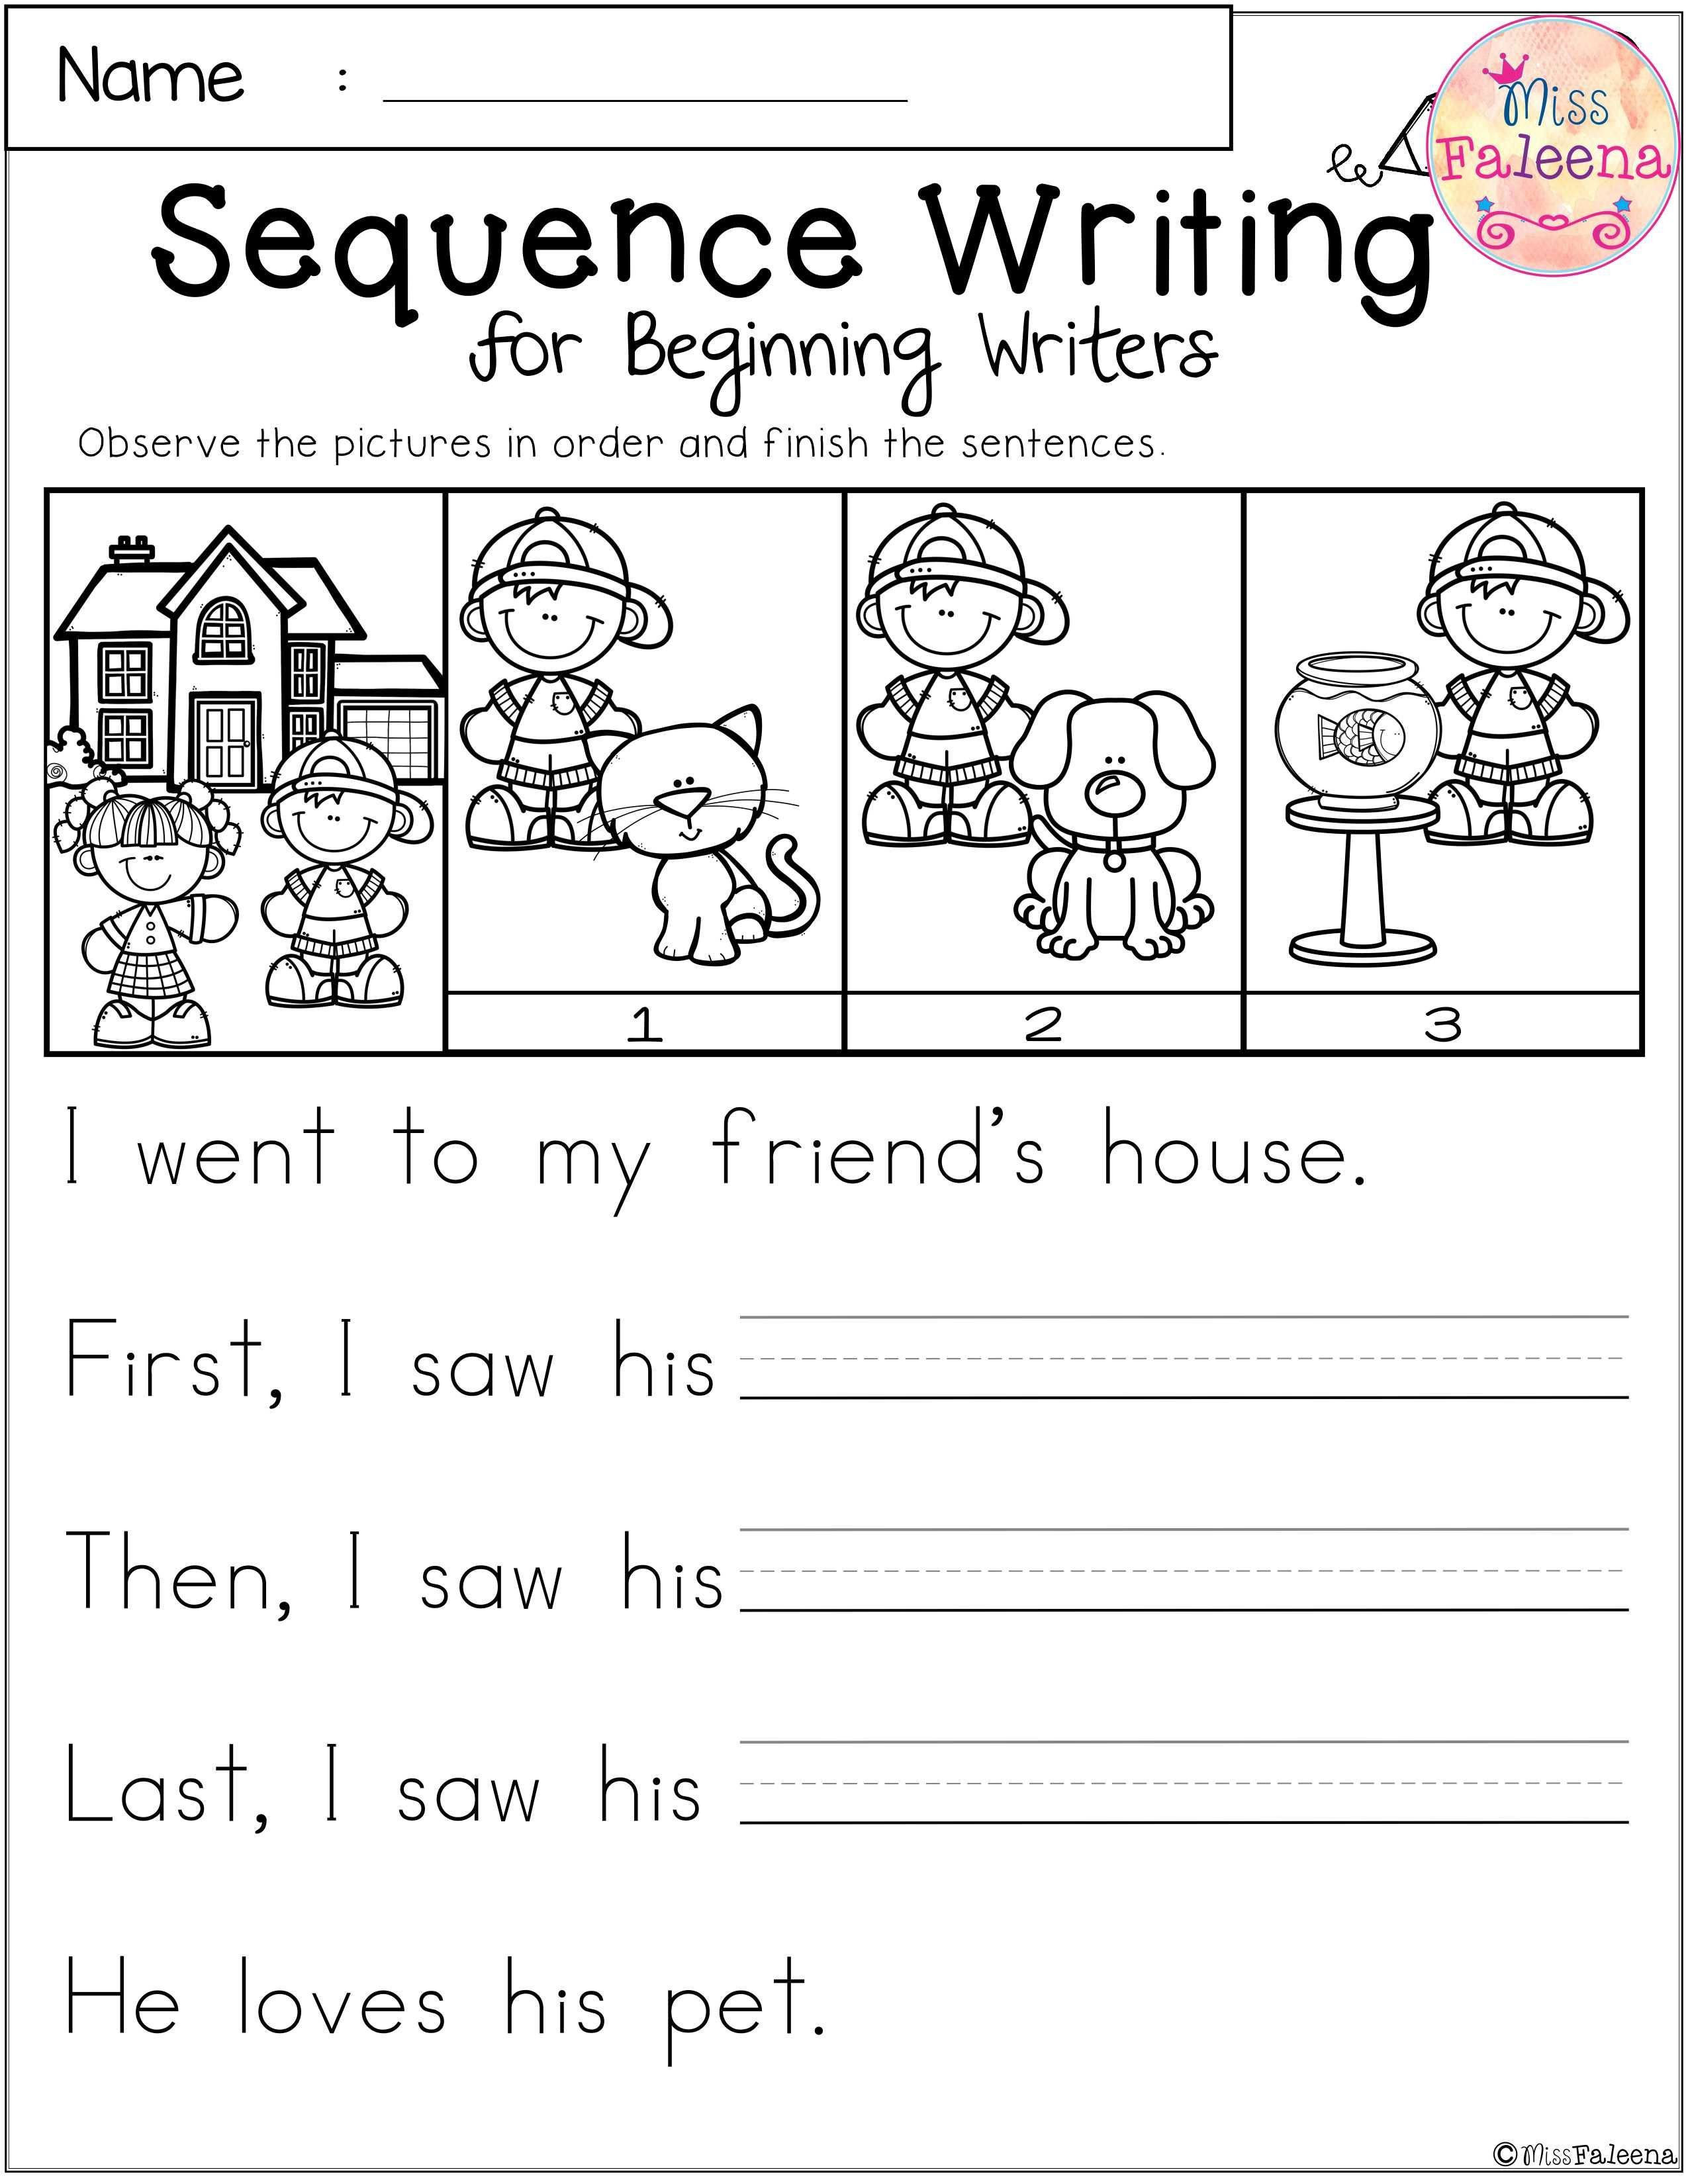 Kindergarten Sequencing Worksheet Free Sequence Writing for Beginning Writers with Images